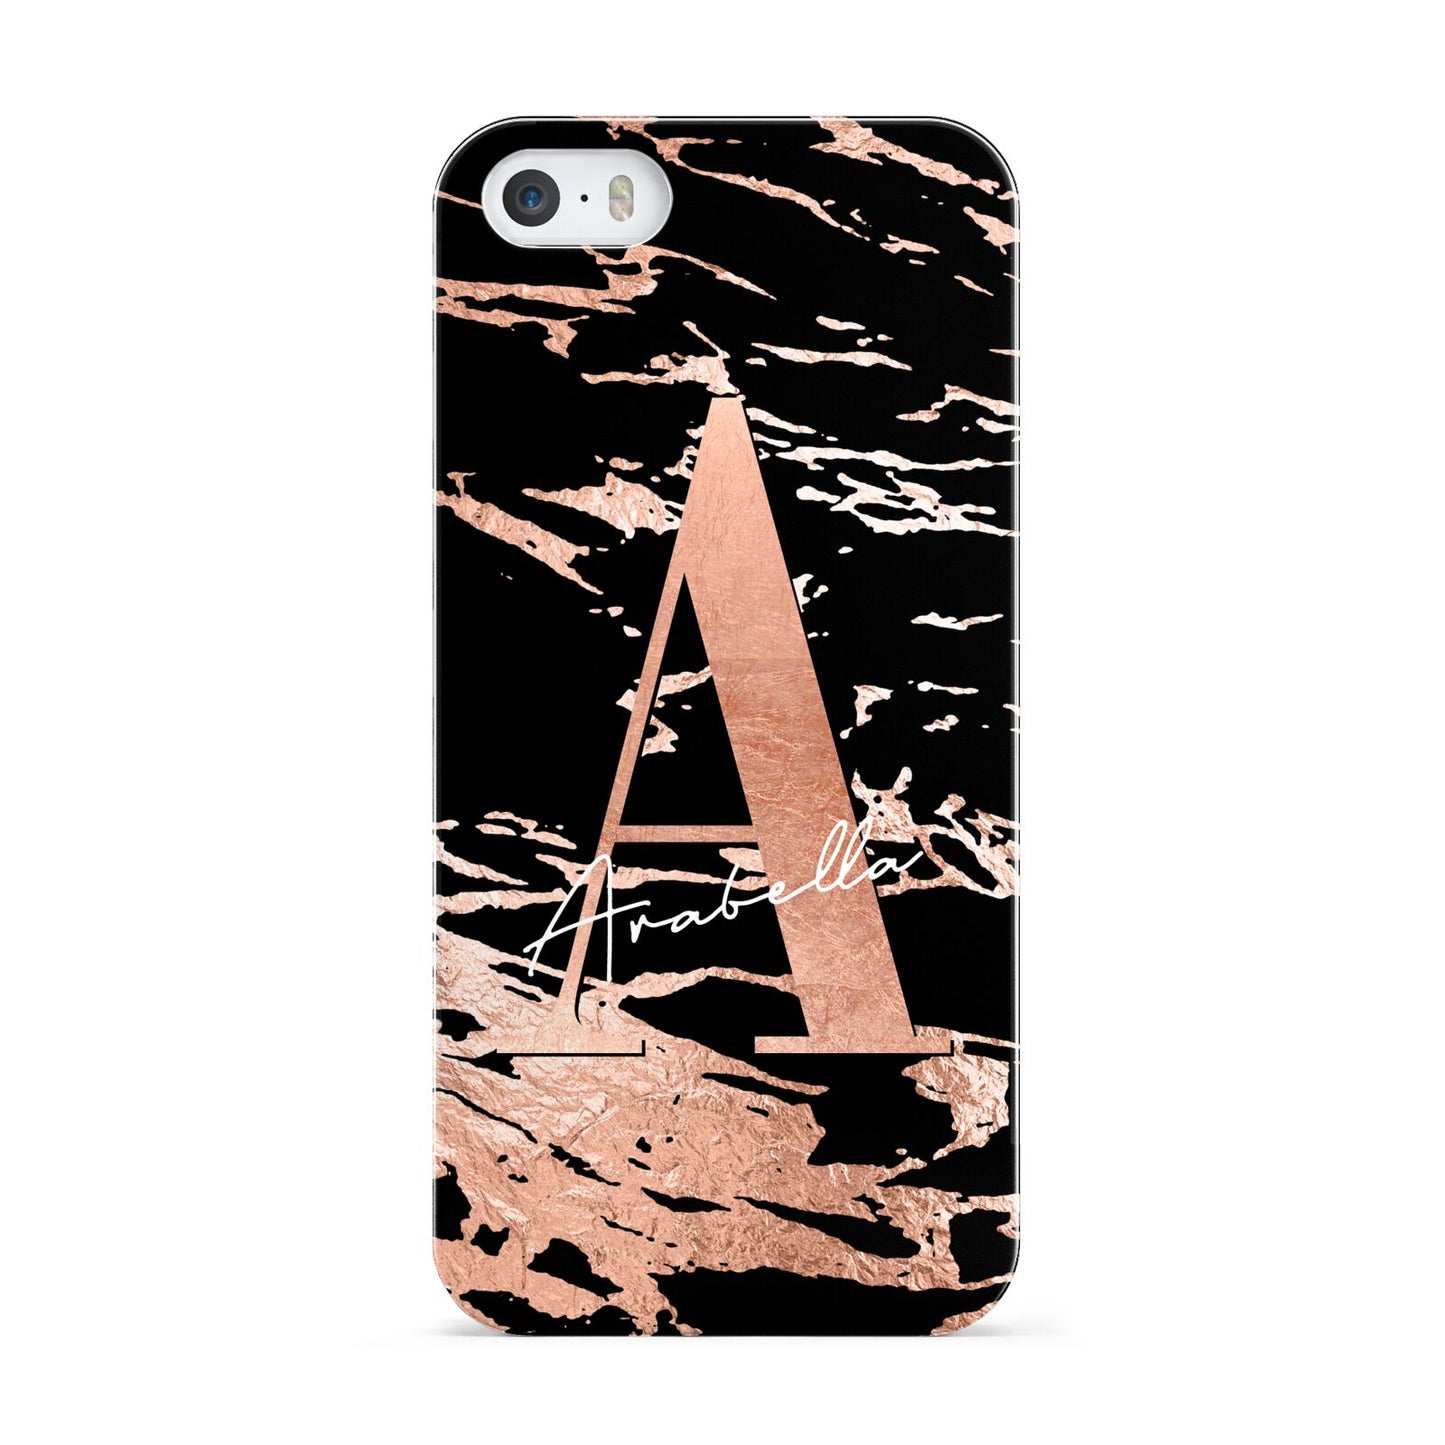 Personalised Black Copper Marble Apple iPhone 5 Case